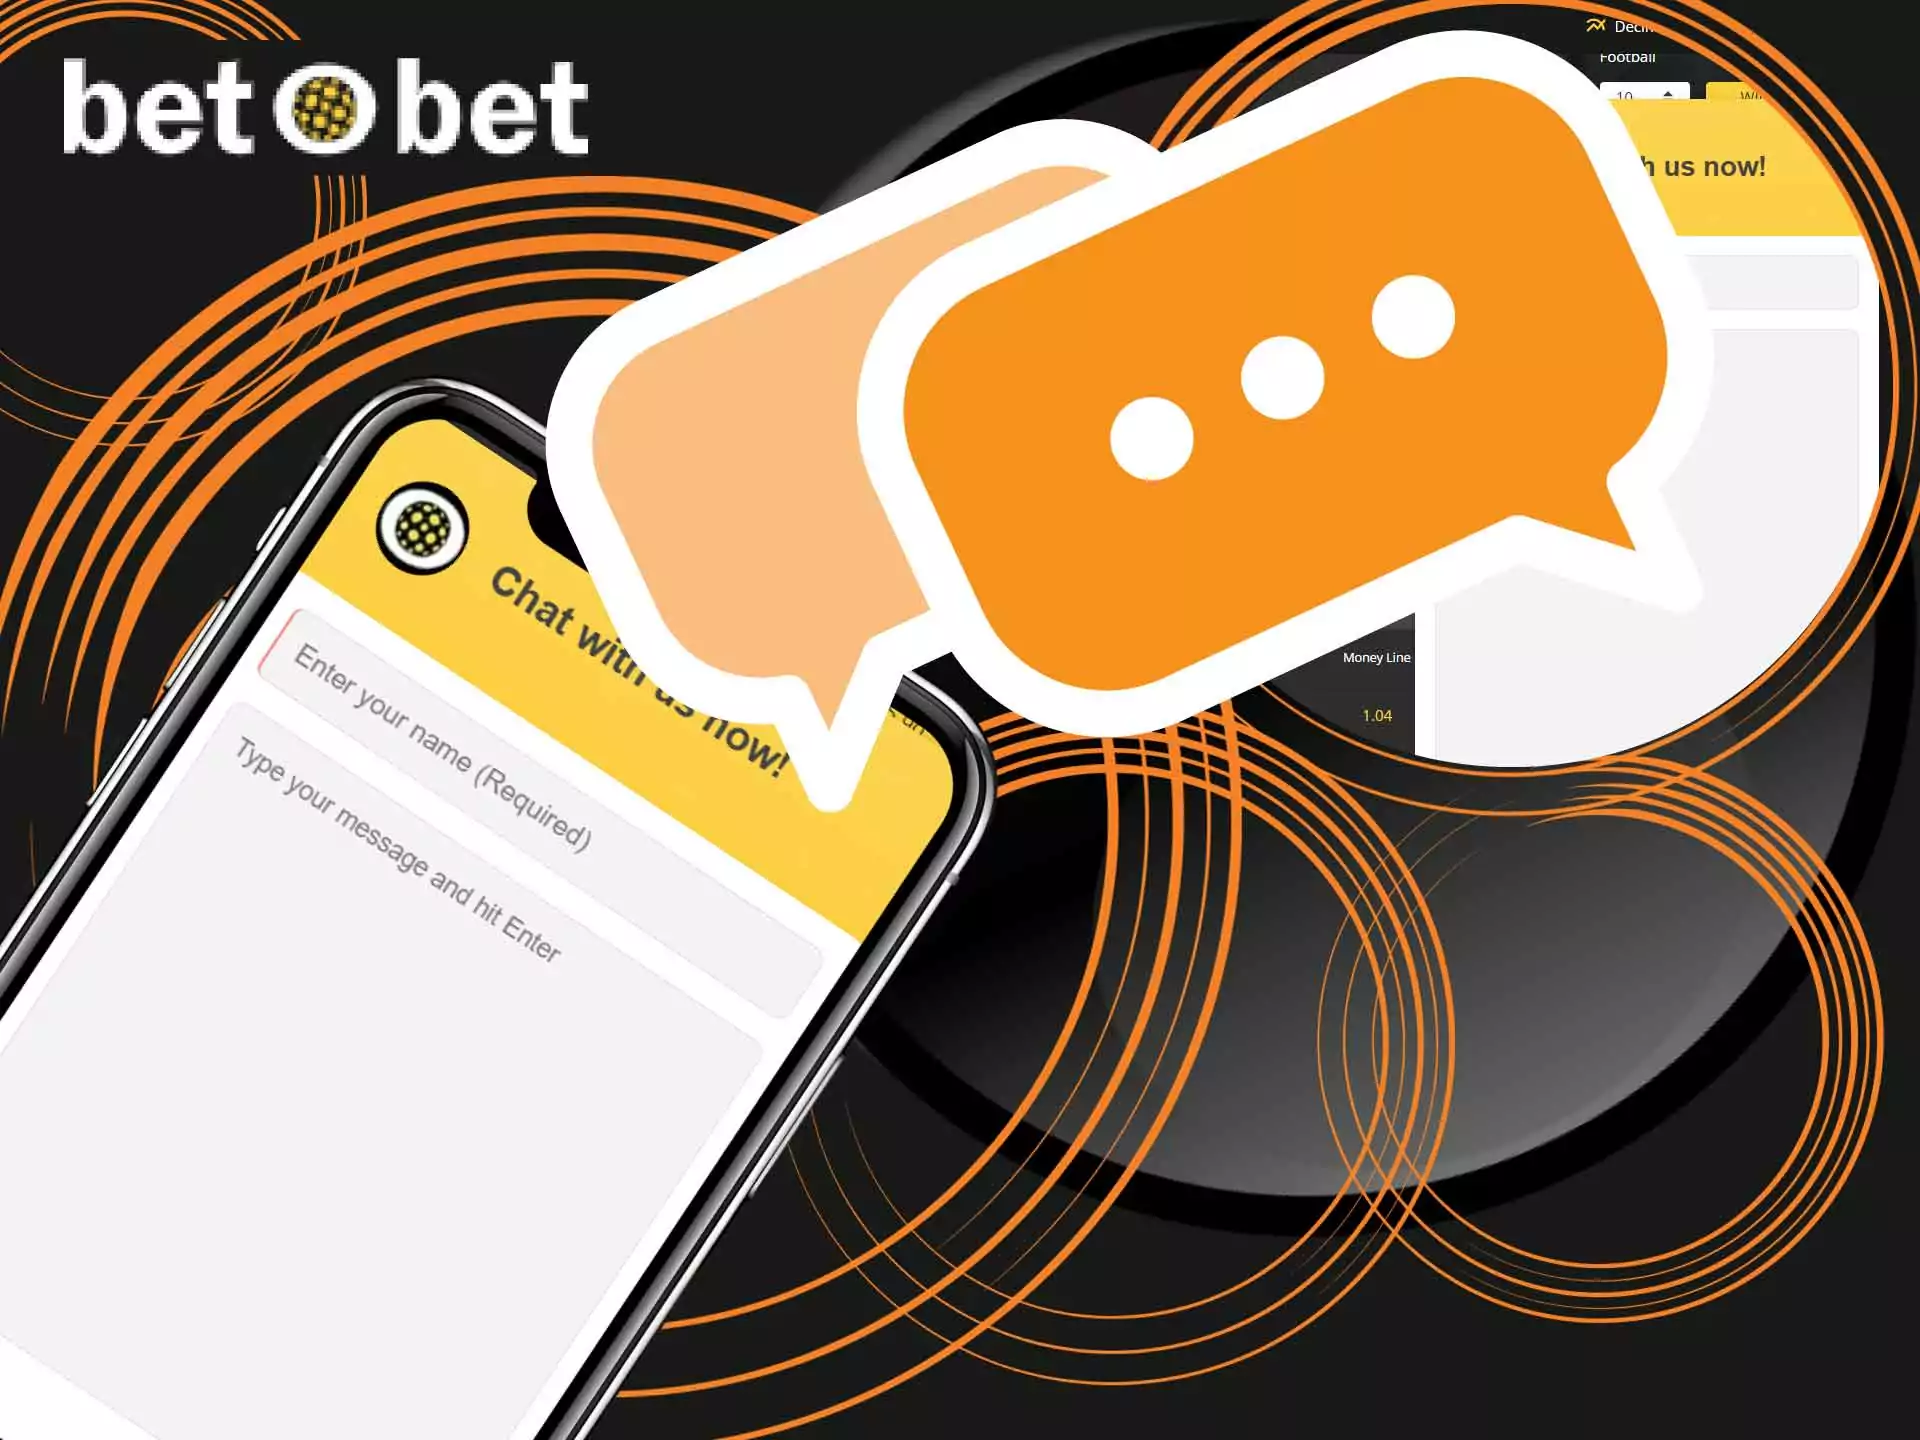 There is a live support chat in the BetOBet app.